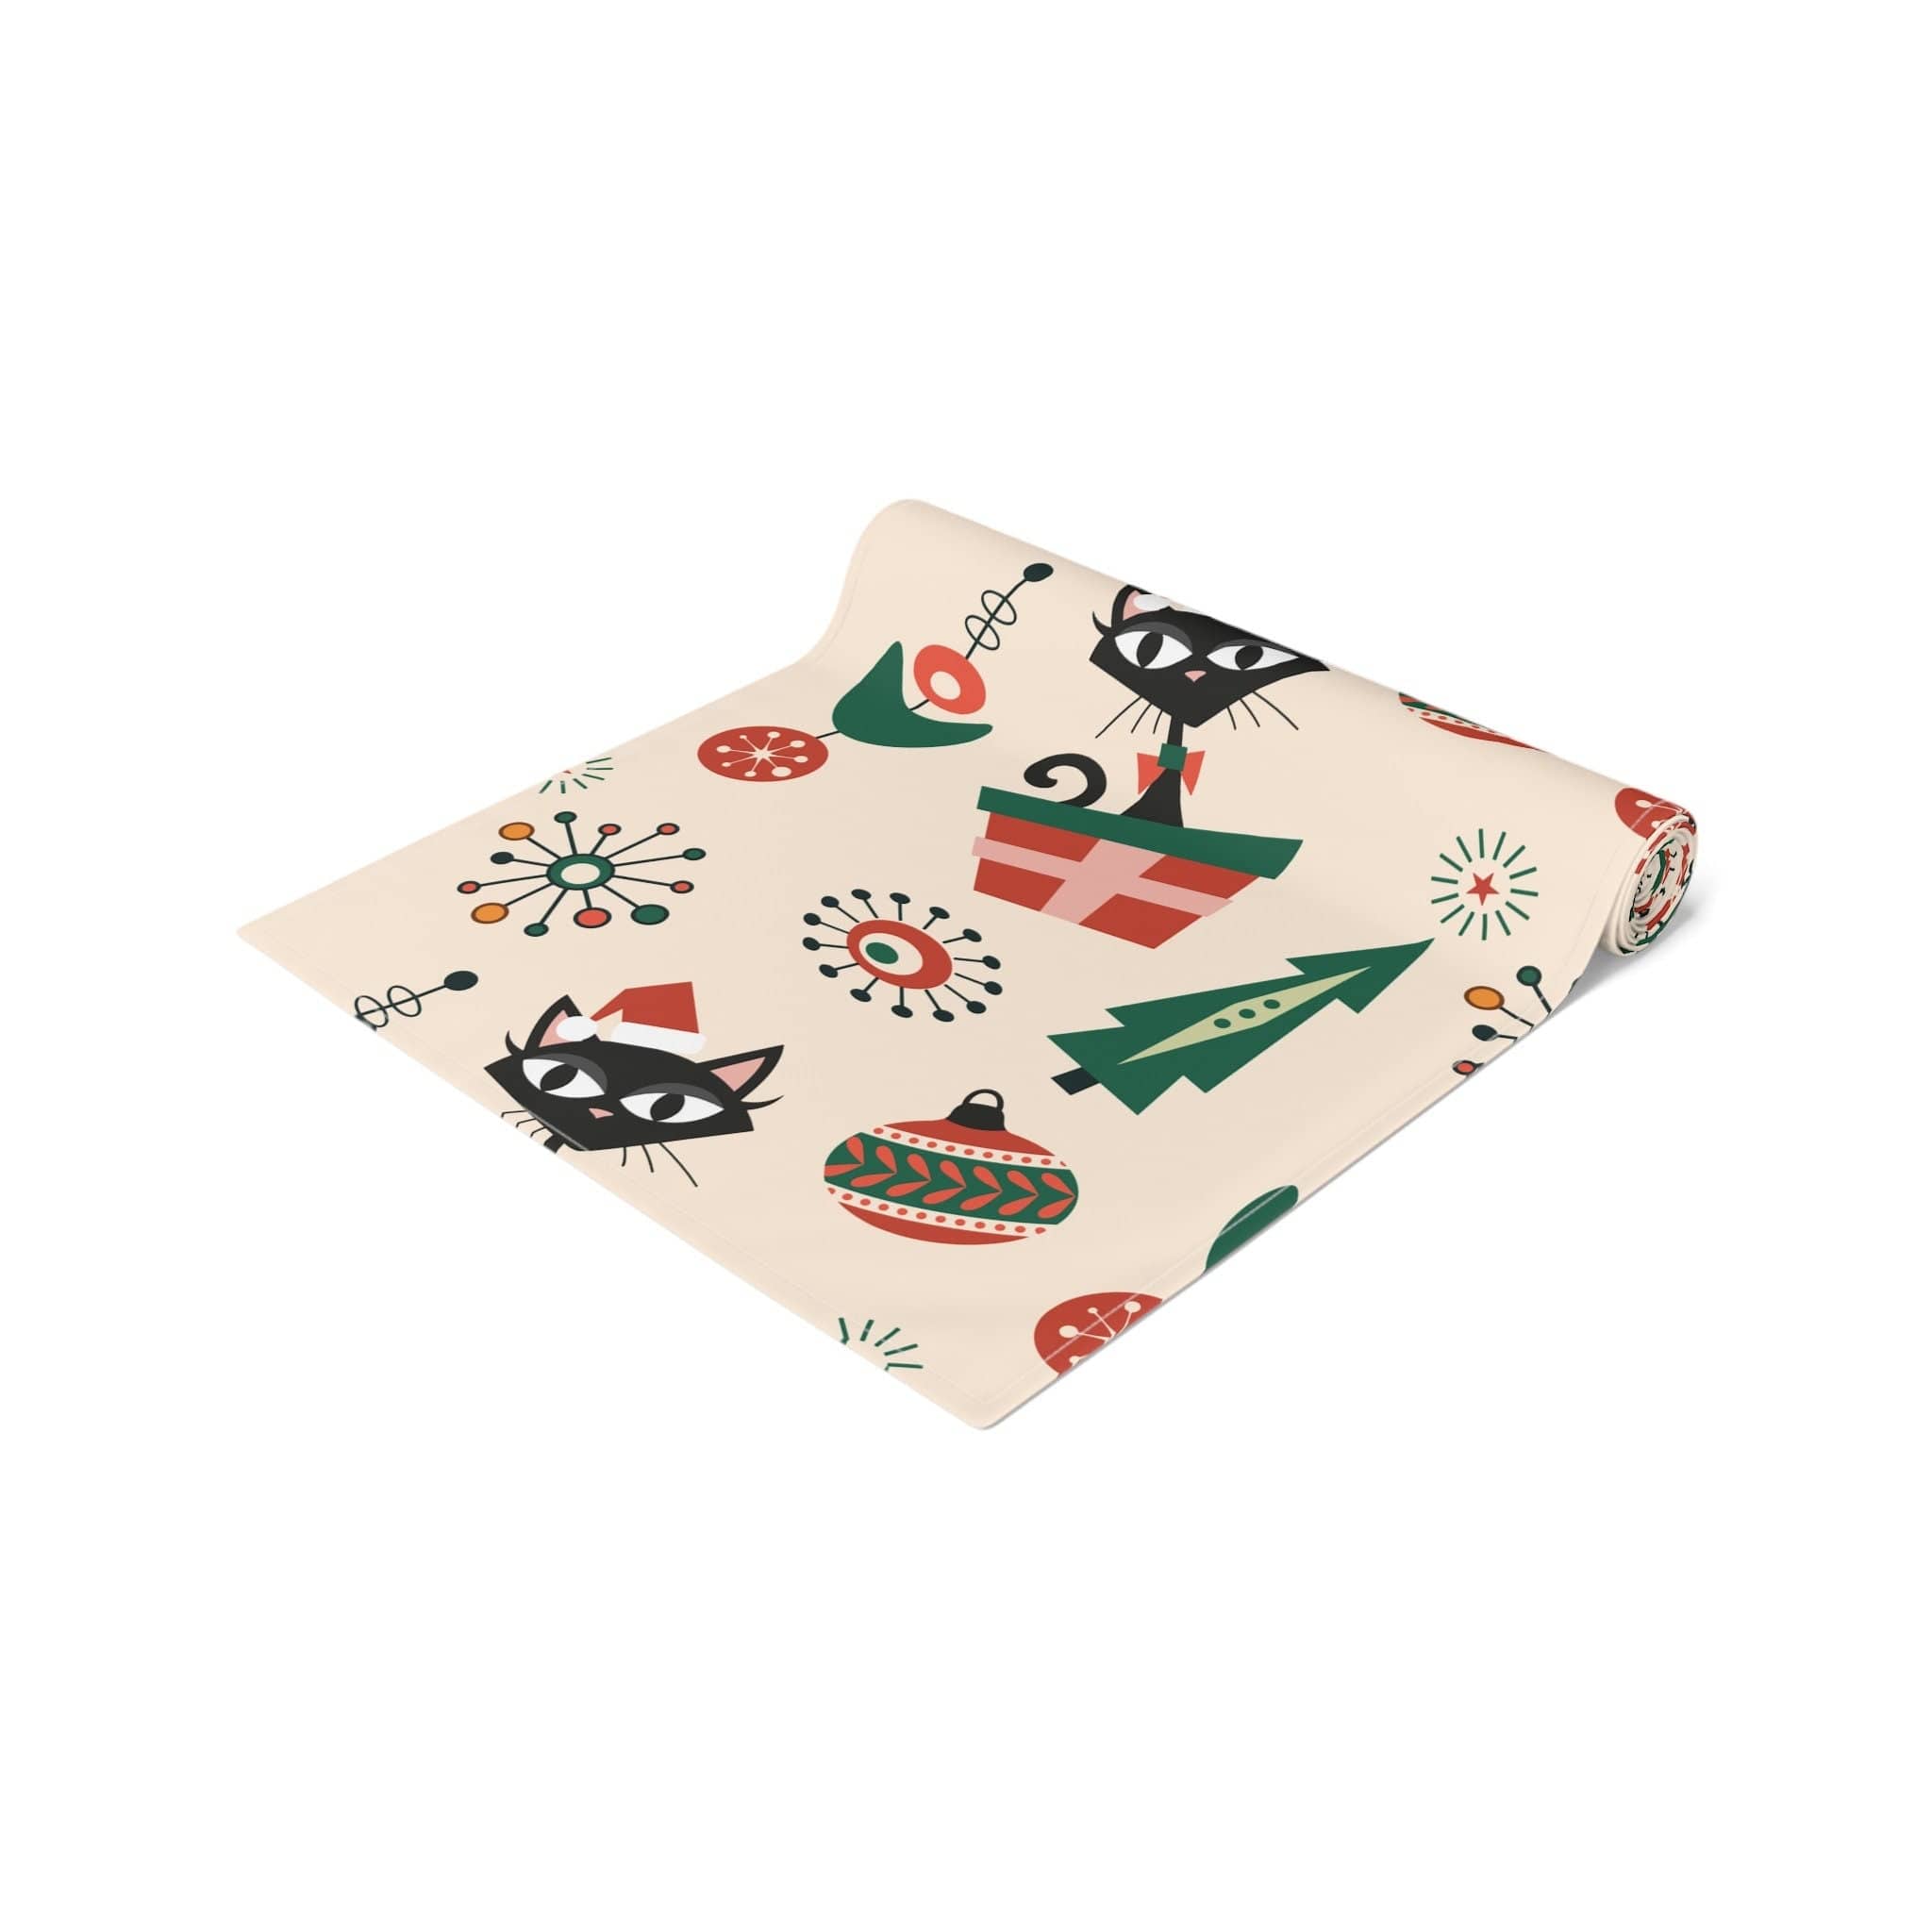 Kate McEnroe New York Mid Century Modern Atomic Kitschy Cat Christmas Table Runner, 50s Vintage Style Holiday DecorTable Runners11229806143697107890